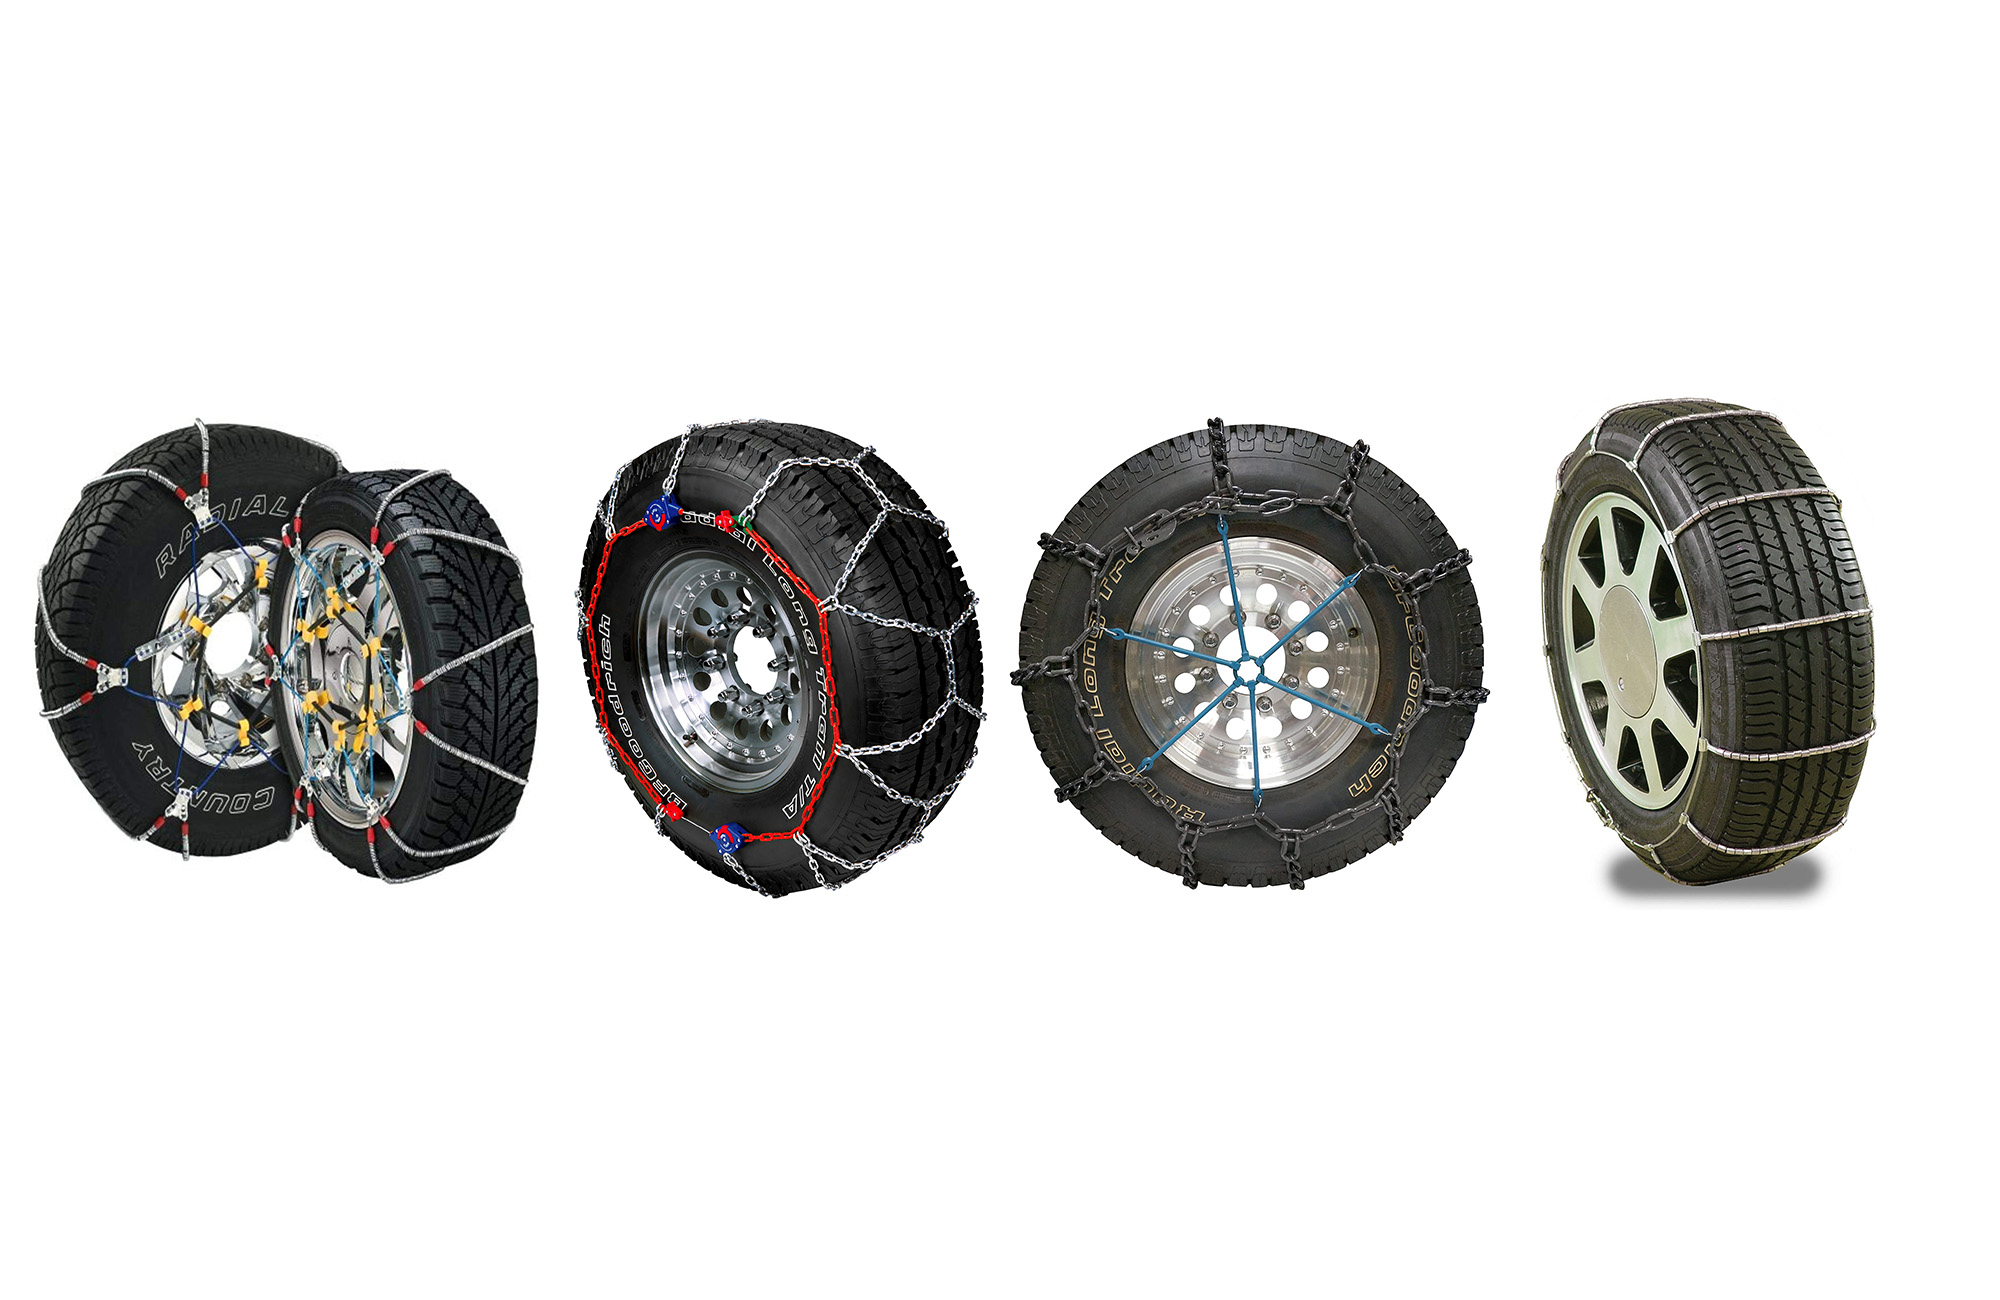 How to Install Snow Chains on Tires: 14 Steps (with Pictures)